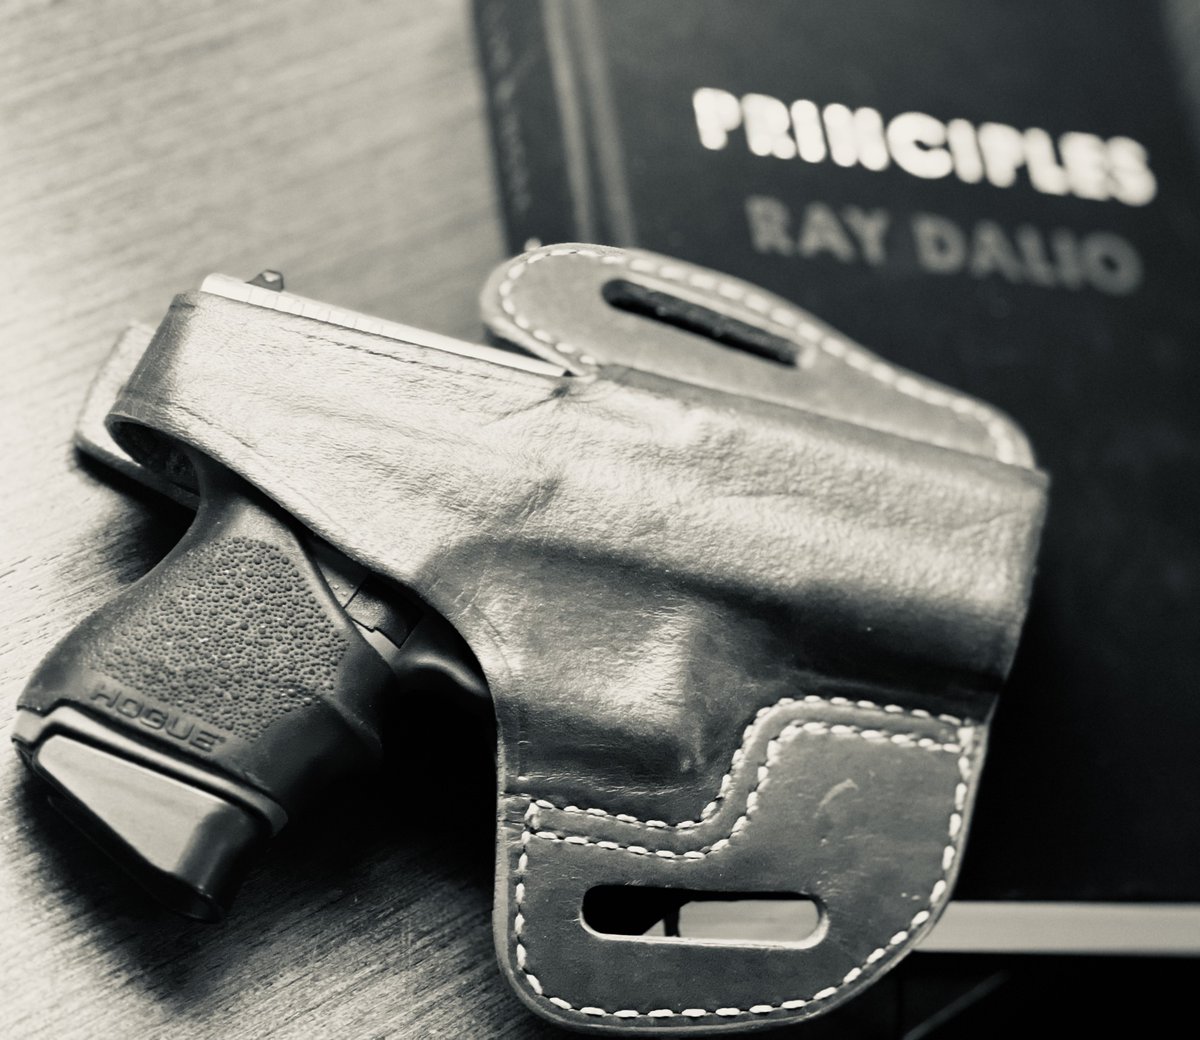 On the road again with my Two Slot Pancake Holster and a good book 🤓

#Holster #ConcealedCarry #LeatherHolster #ThatArmorLife #OnTheRoadAgain #GouldAndGoodrich #PointblankDutyGear